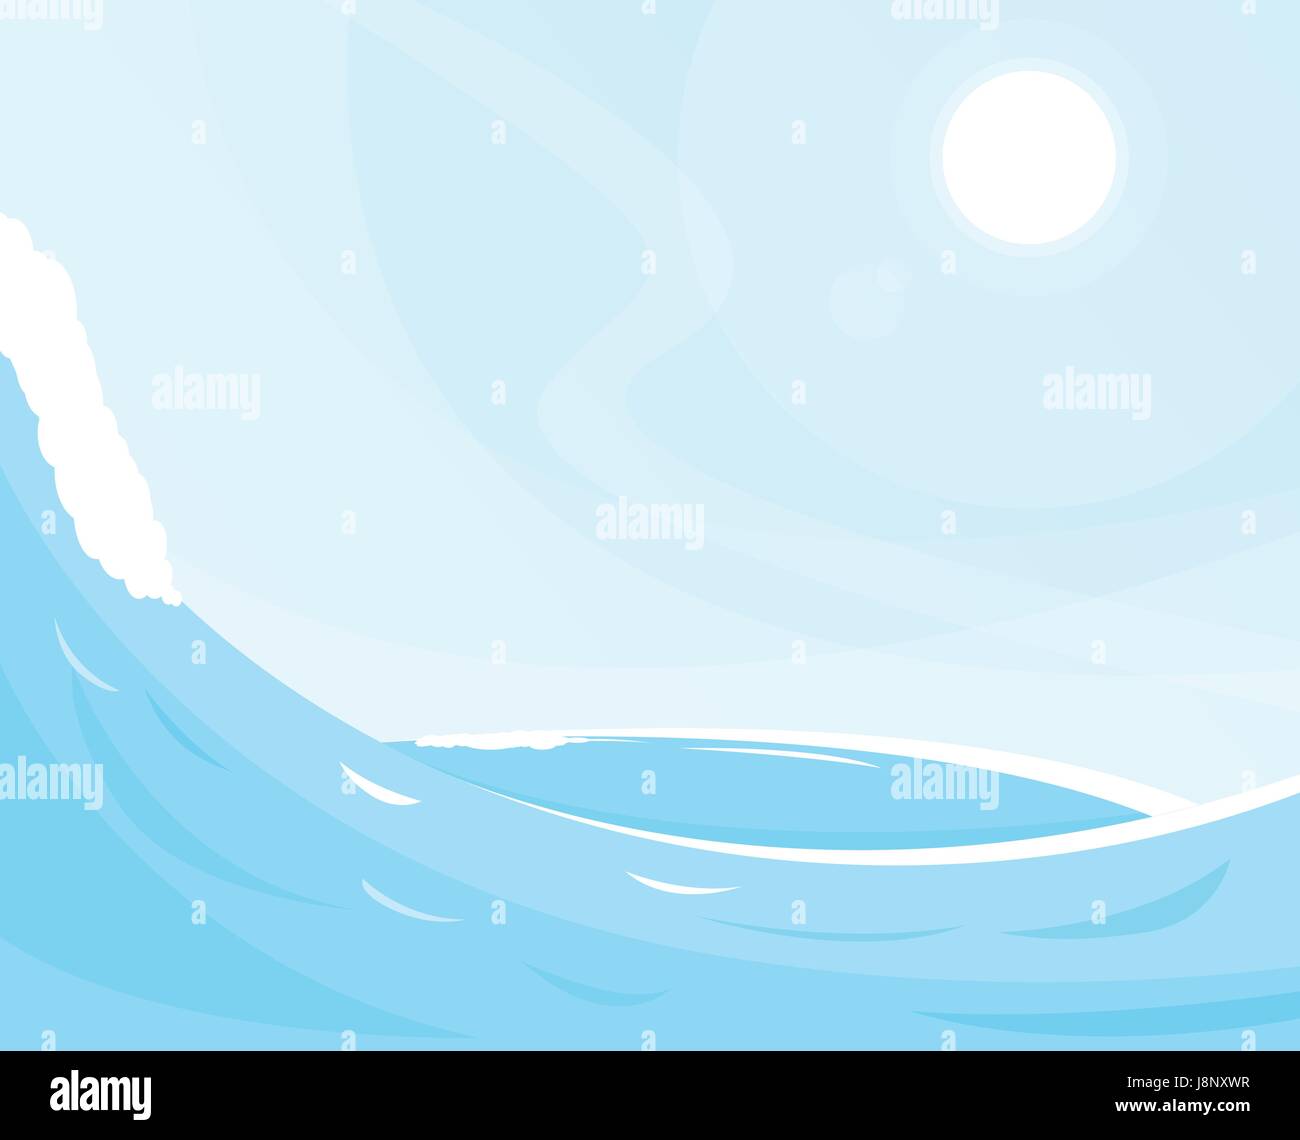 Sea waves background Stock Vector